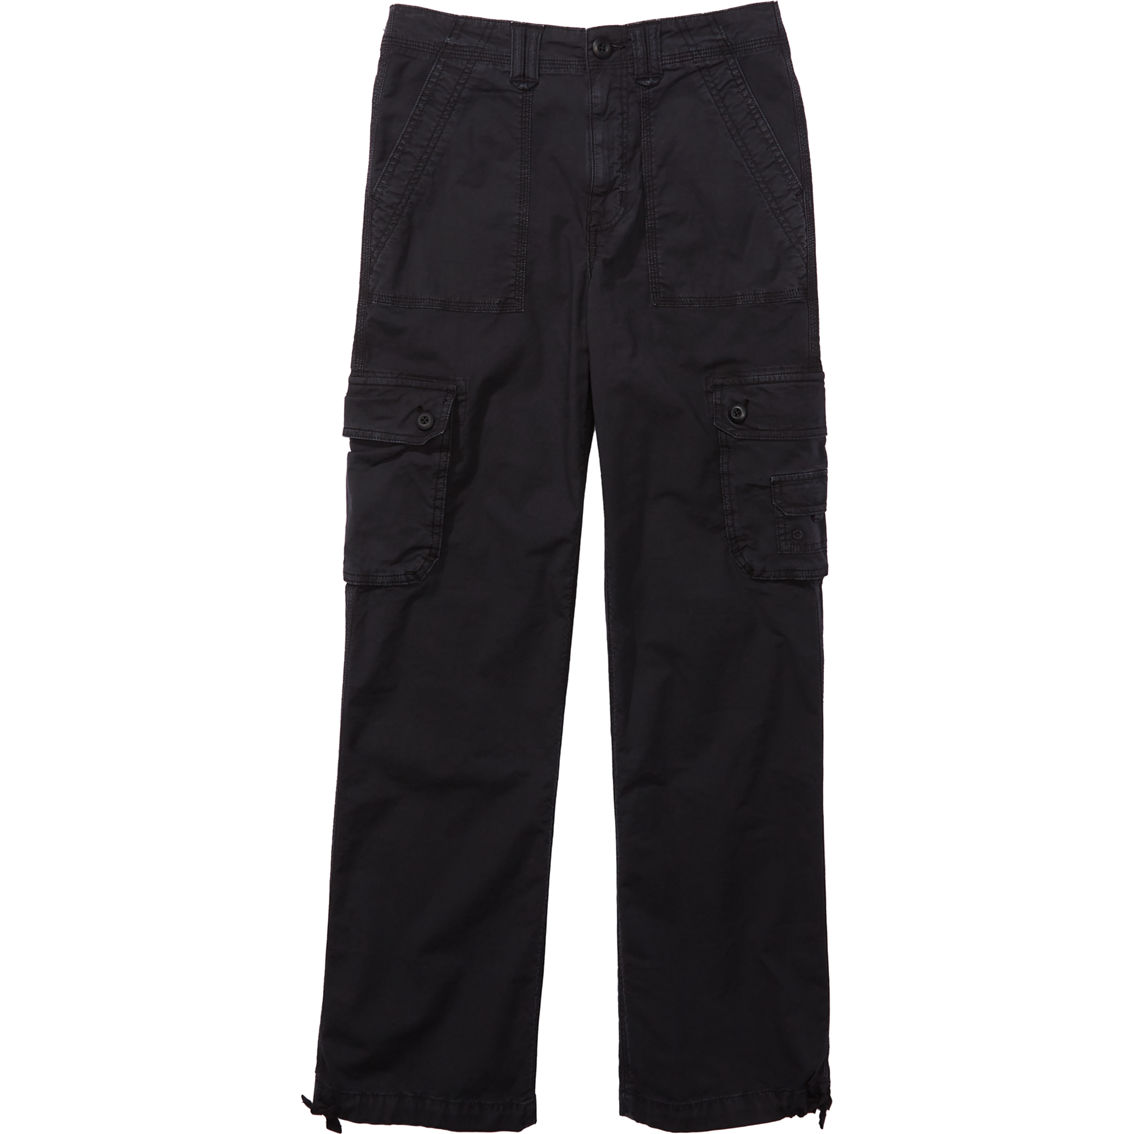 American Eagle Snappy Stretch Baggy Joggers - Image 4 of 5